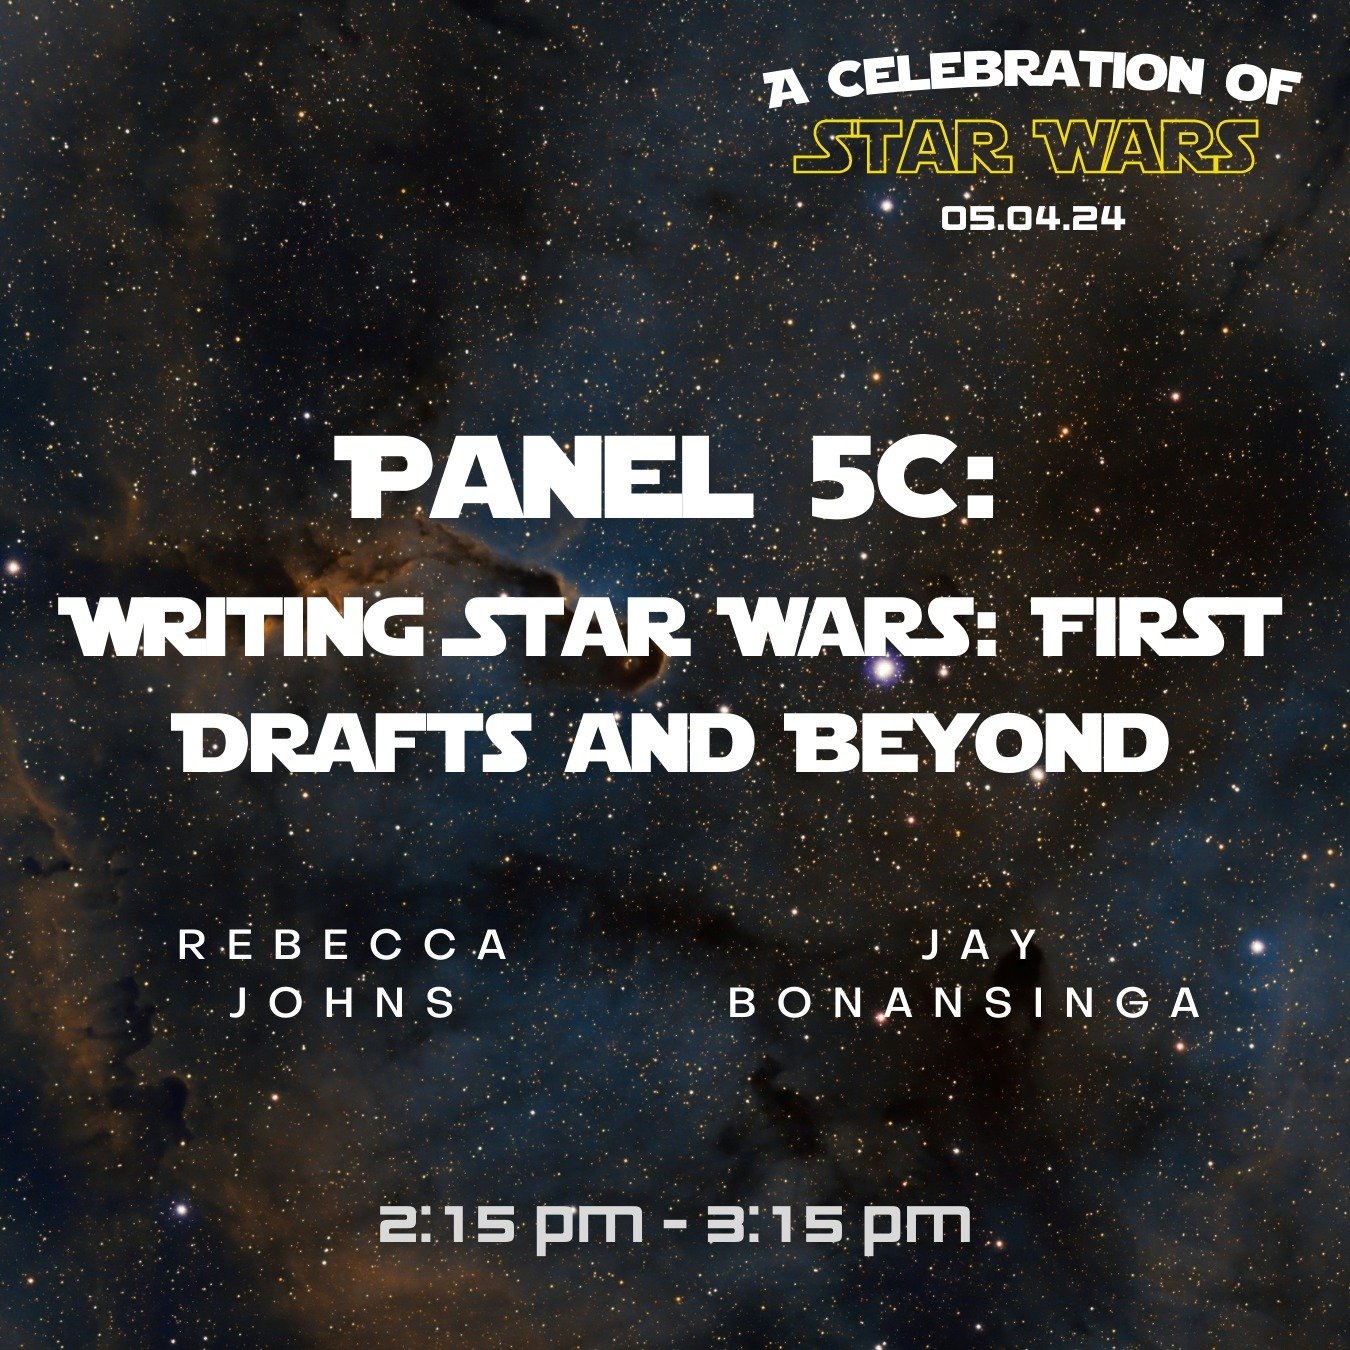 For Panel 5C we&rsquo;ll be welcoming two DePaul Professors&ndash;Rebecca Johns and Jay Bonansinga to speak on &ldquo;Writing Star Wars: First Drafts and Beyond!&rdquo; Their panel will be taking place in Room 804 from 2:15 pm - 3:15 pm!